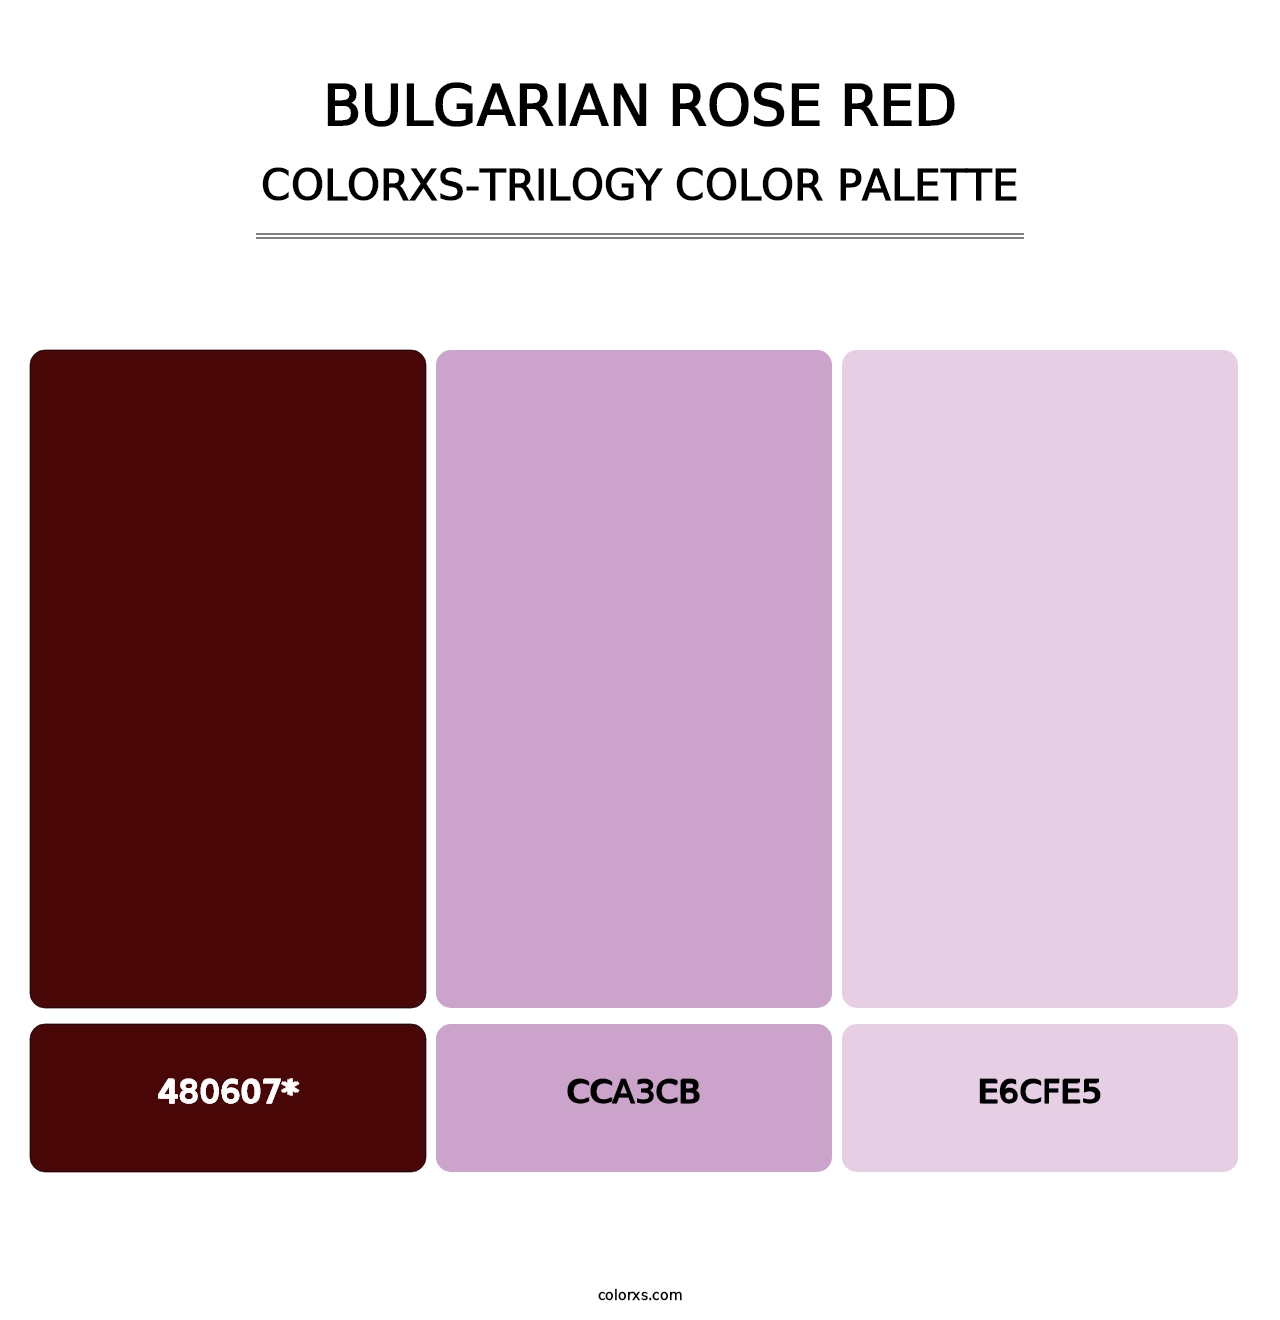 Bulgarian Rose Red - Colorxs Trilogy Palette